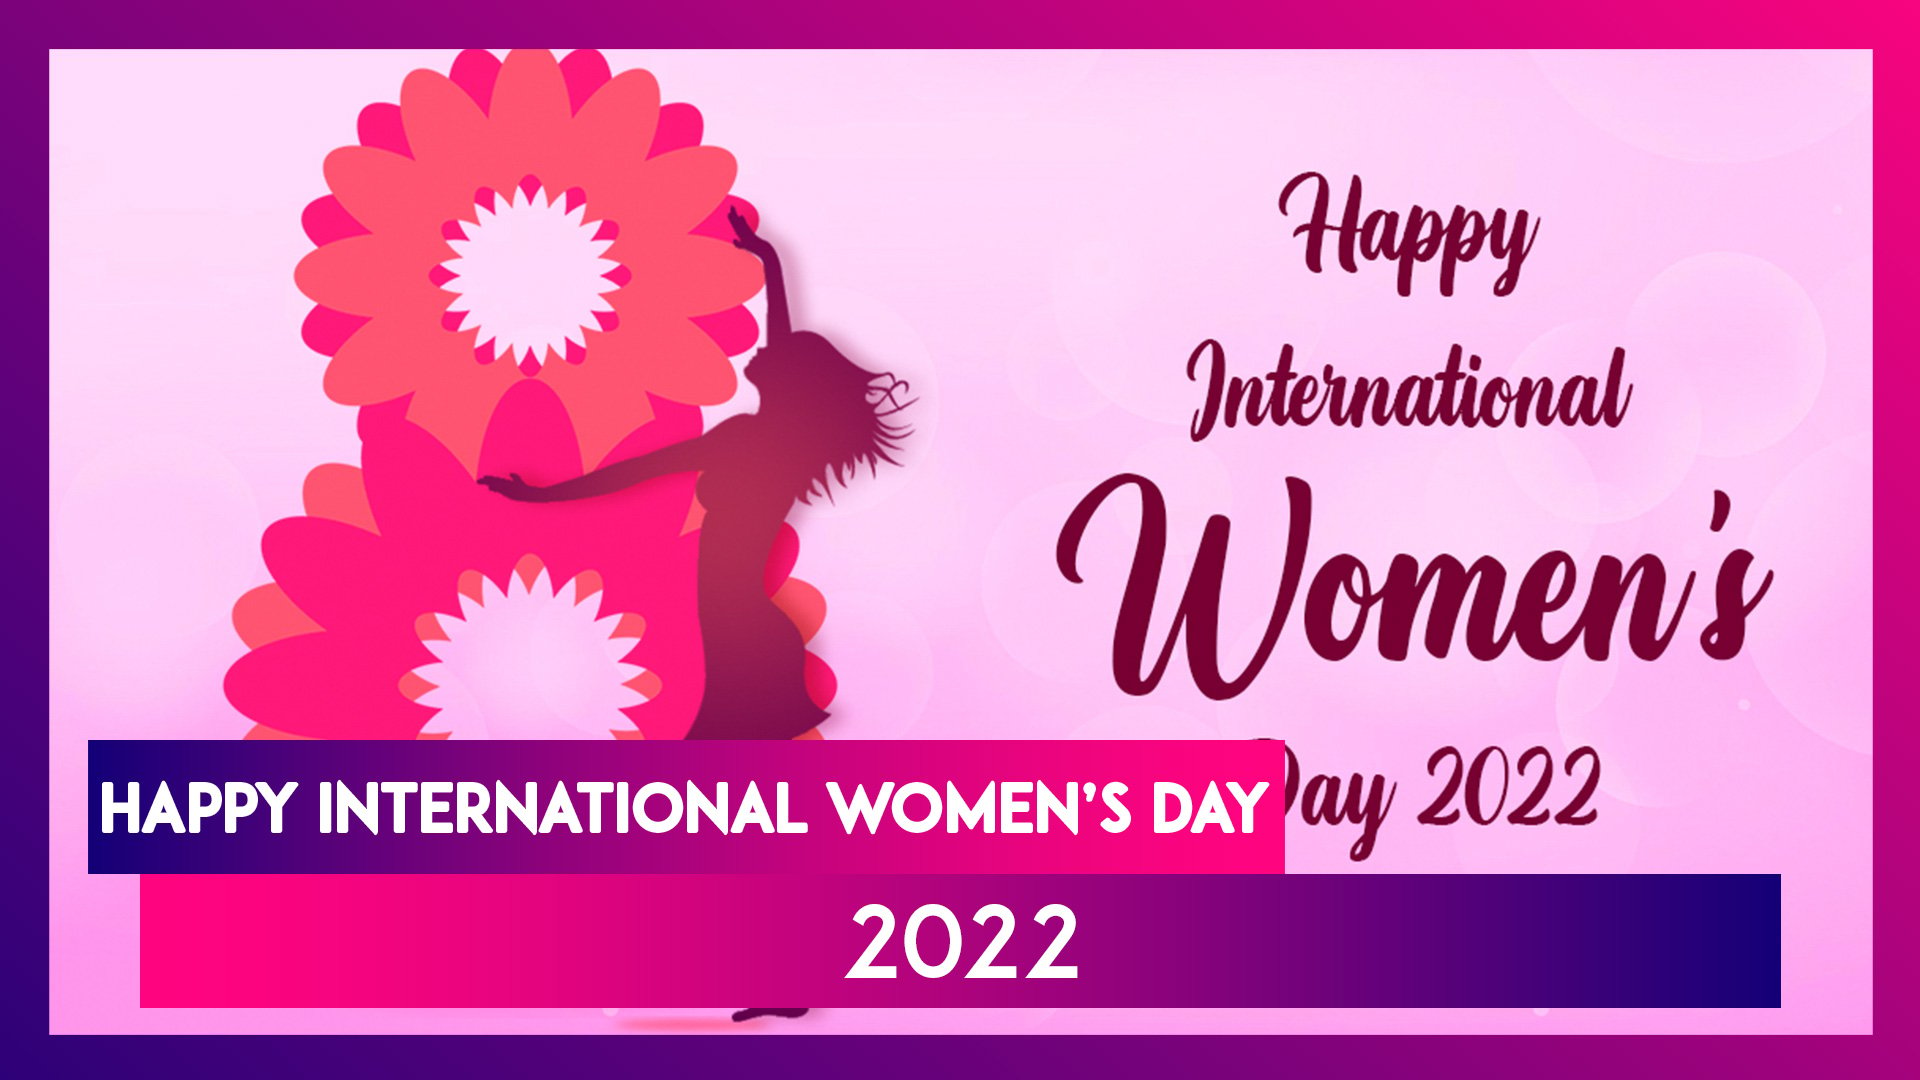 International Women's Day 2022 Wishes: Messages, Powerful Quotes & HD Image for the Special Day